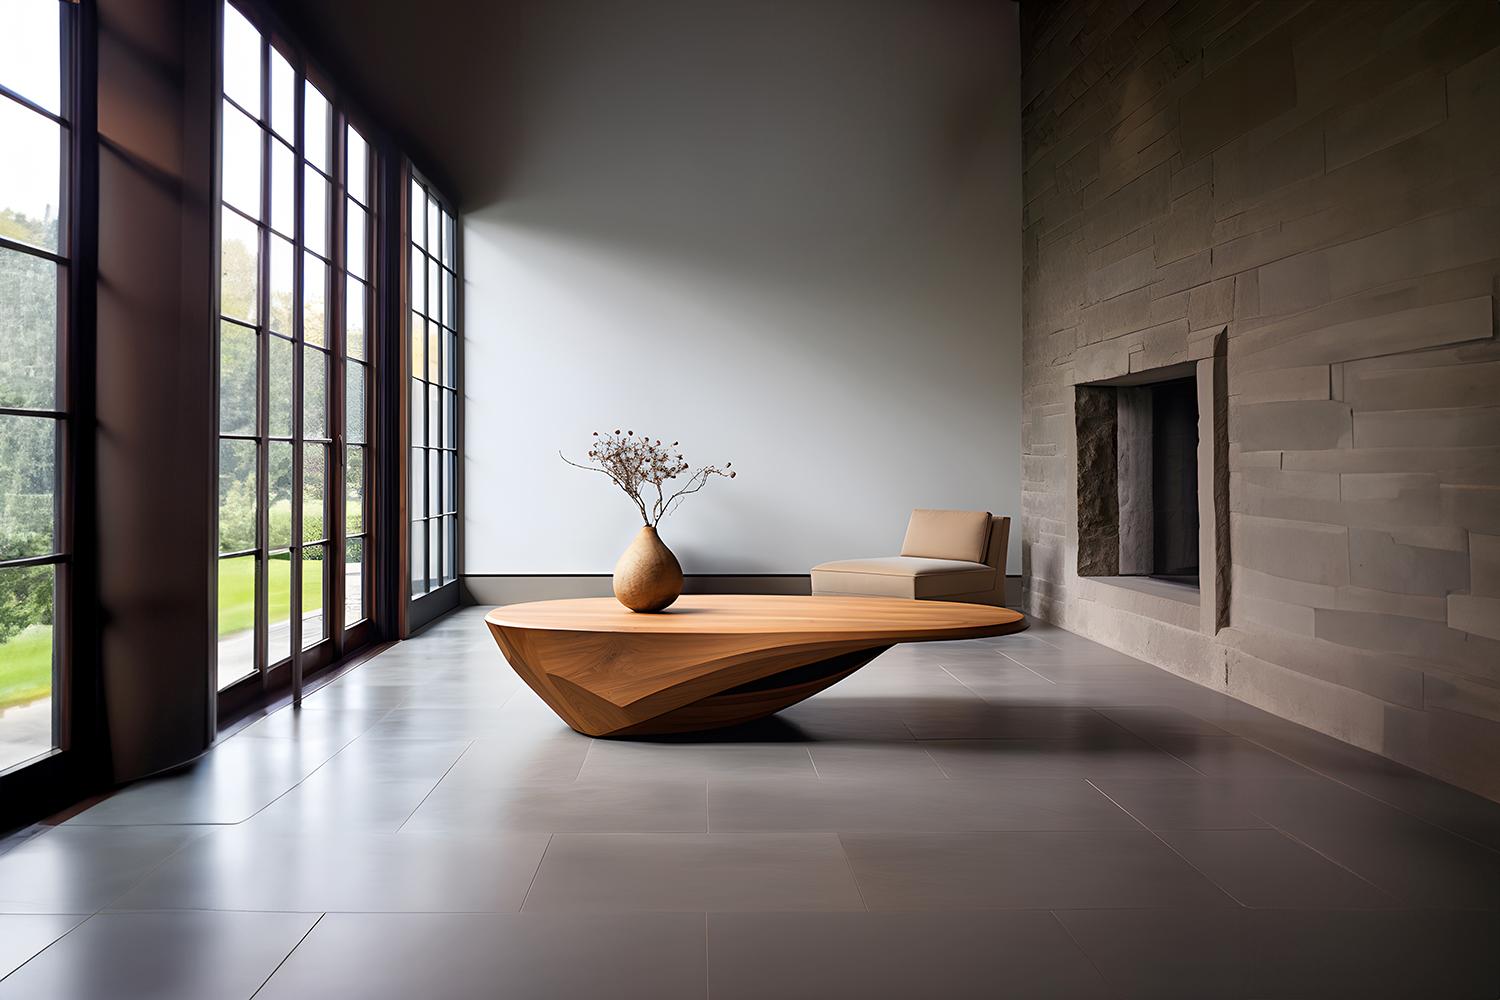 Oval Coffee Table Made of Solid Wood, Center Table Solace S19 by Joel Escalona


The Solace table series, designed by Joel Escalona, is a furniture collection that exudes balance and presence, thanks to its sensuous, dense, and irregular shapes.